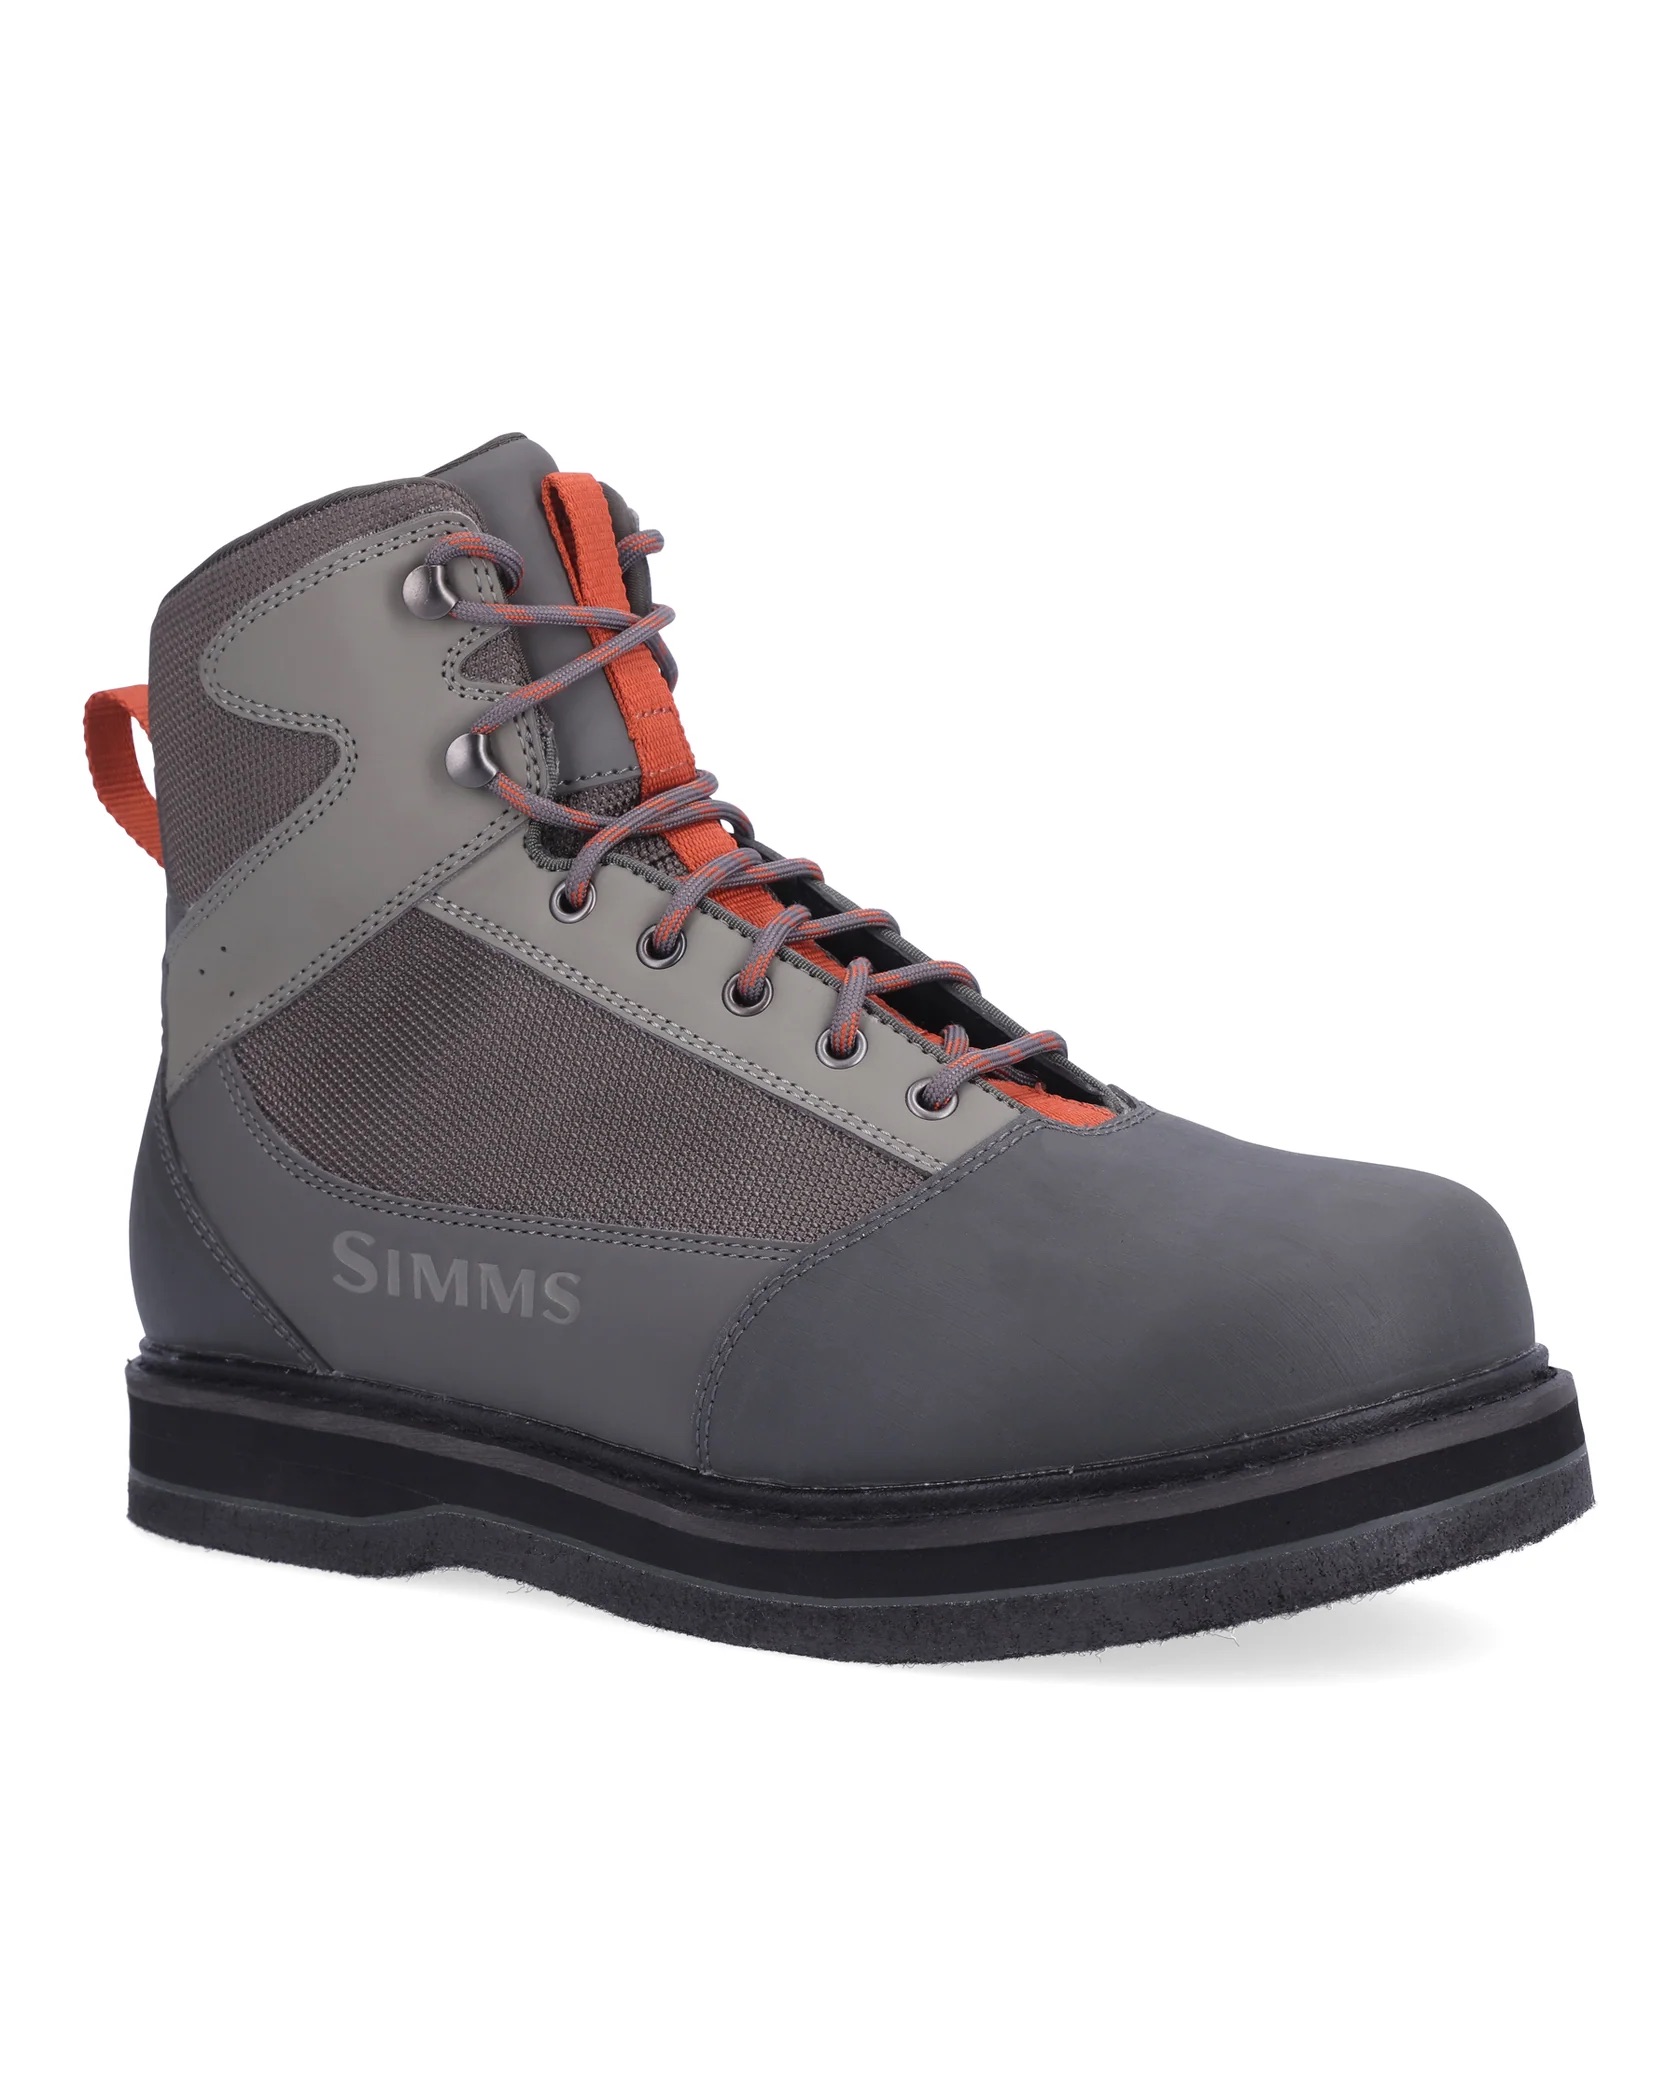 Simms Tributary Wading Boot - Felt - Size 11